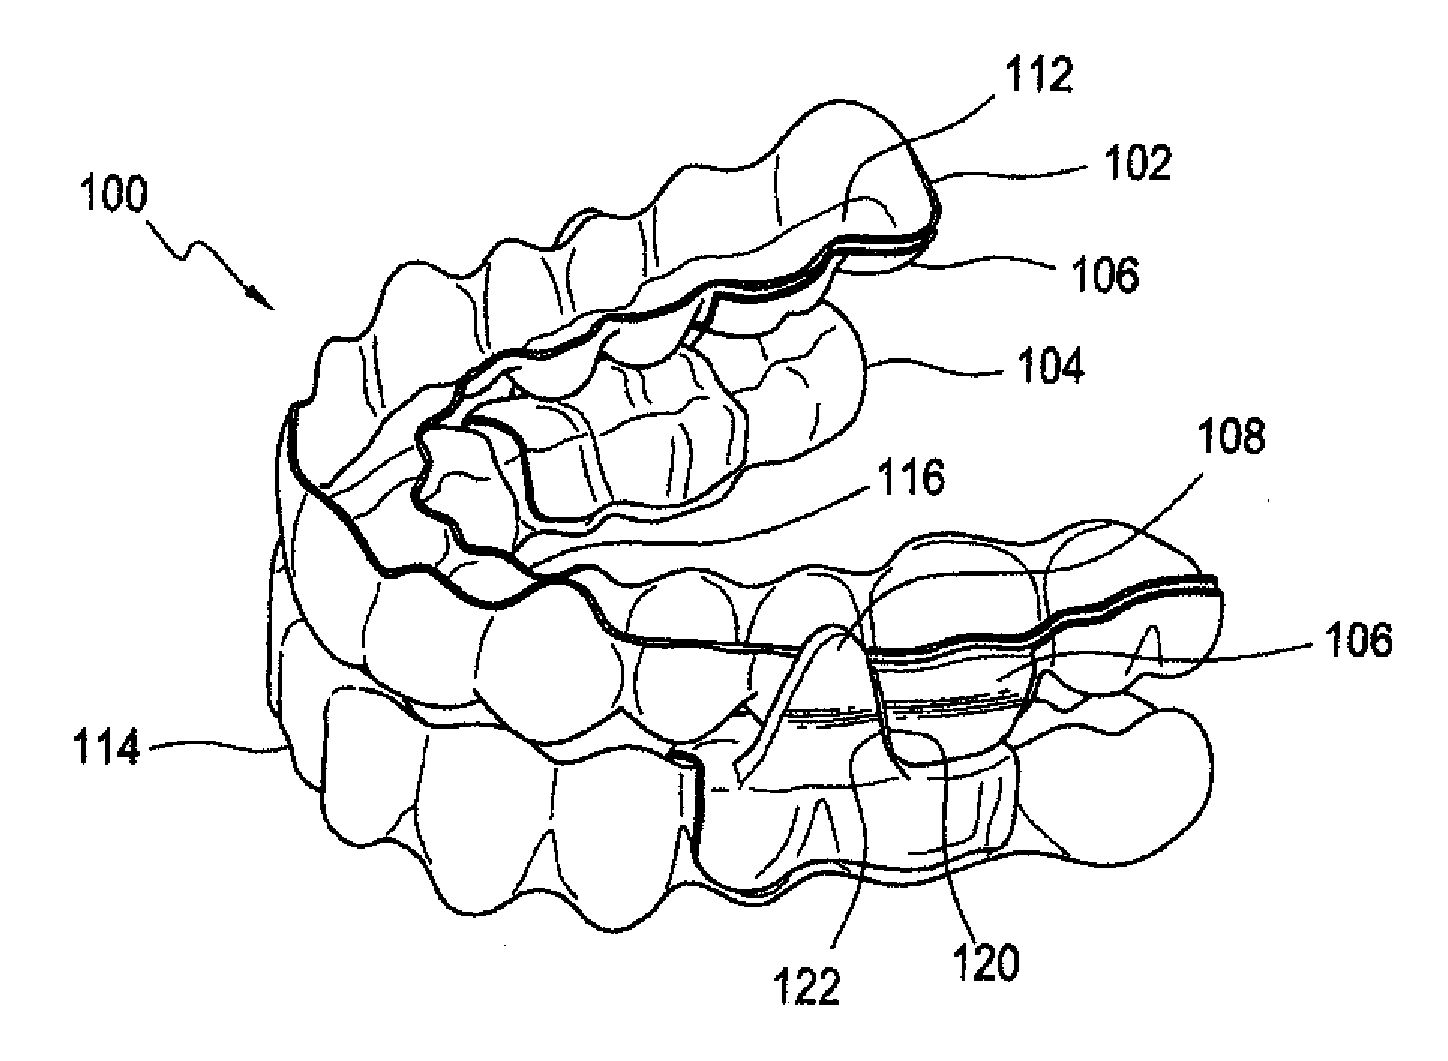 System and Method for Treating Obstructive Sleep Apnea and Correcting Malocclusion Simultaneously